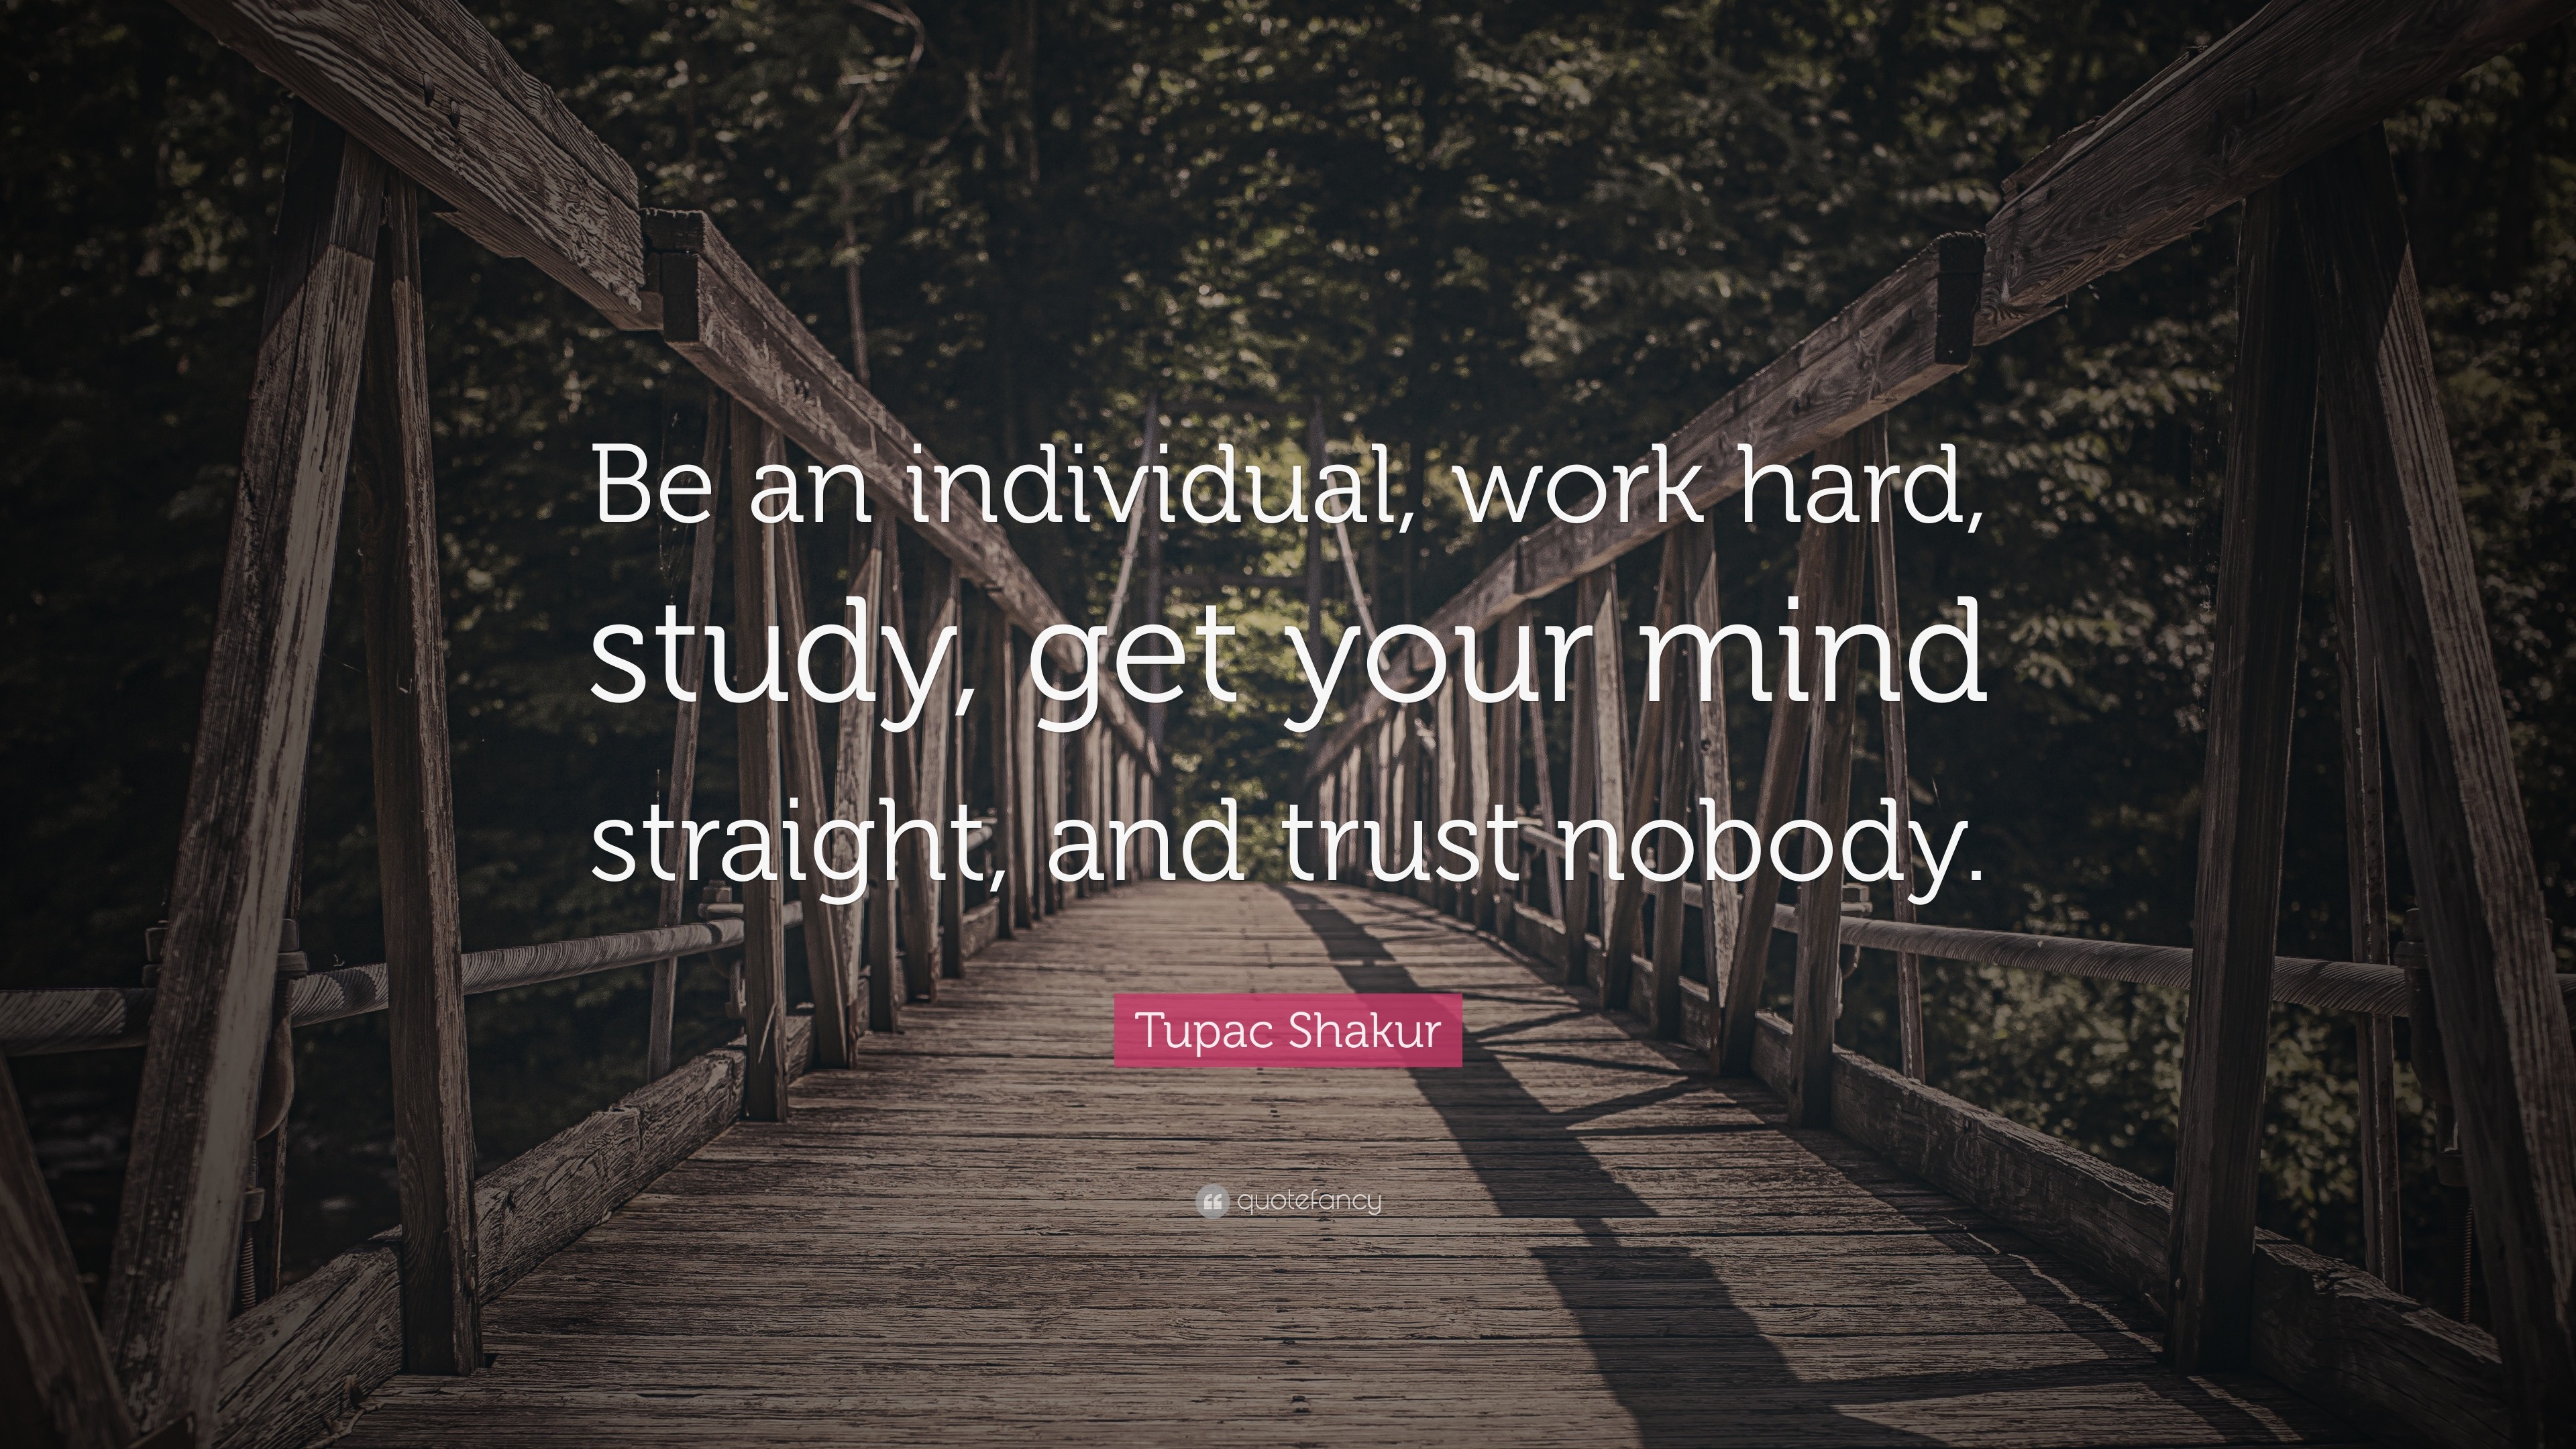 3840x2160 Hard Work Quotes: “Be an individual, work hard, study, get your